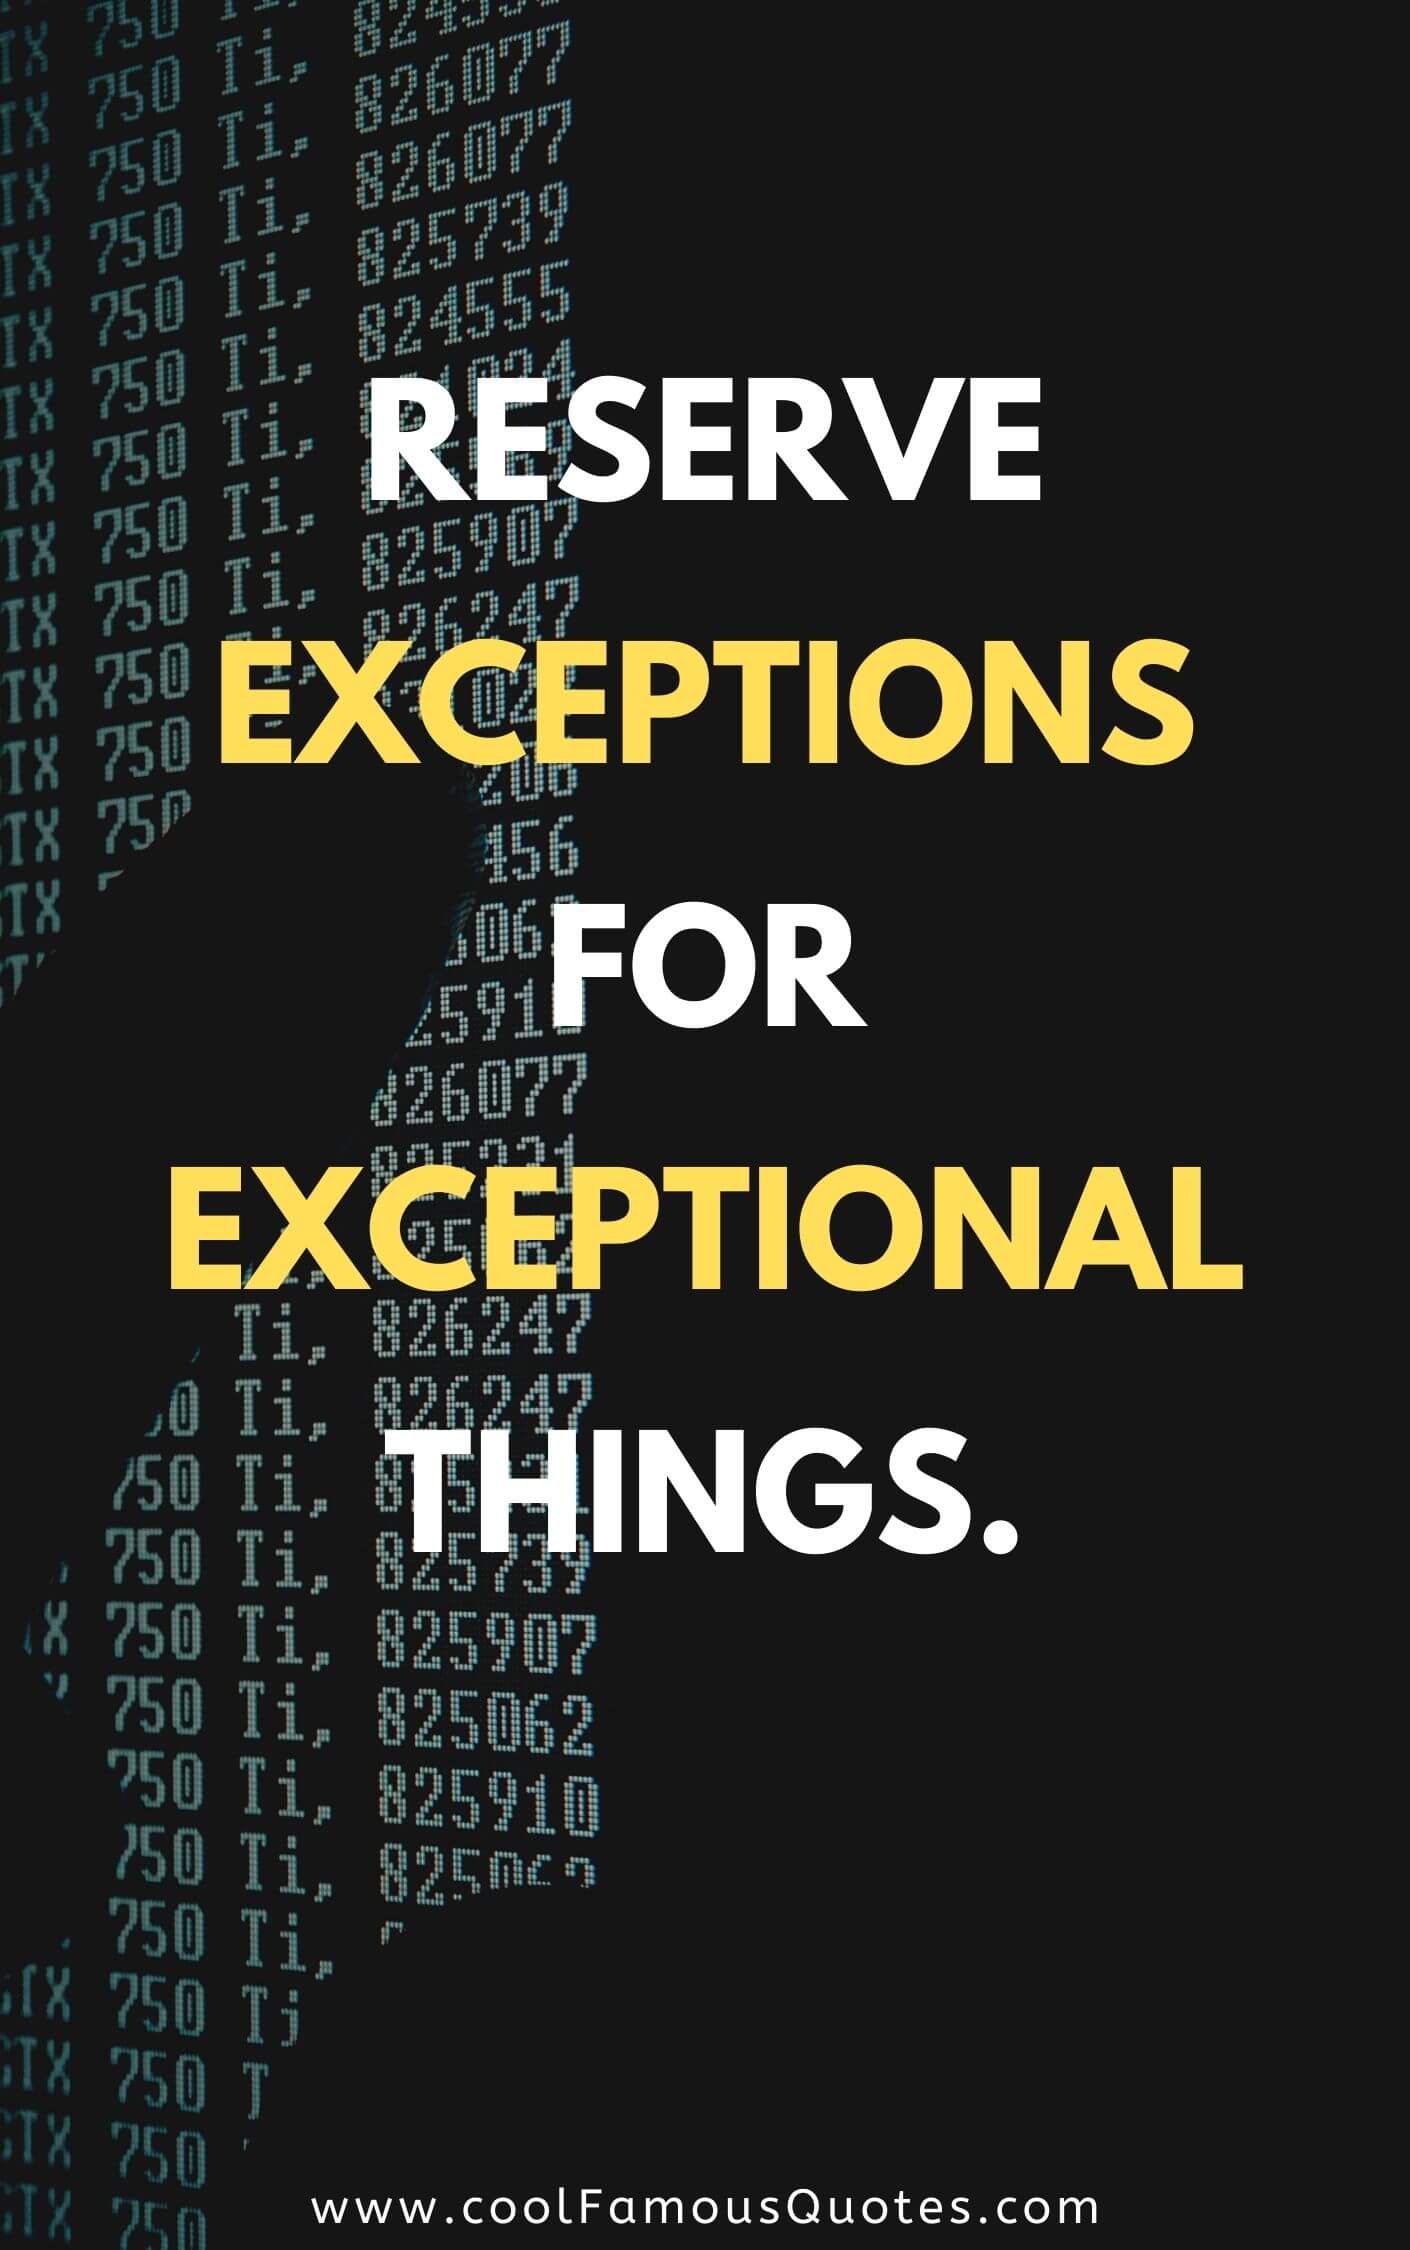 Reserve exceptions for exceptional things.